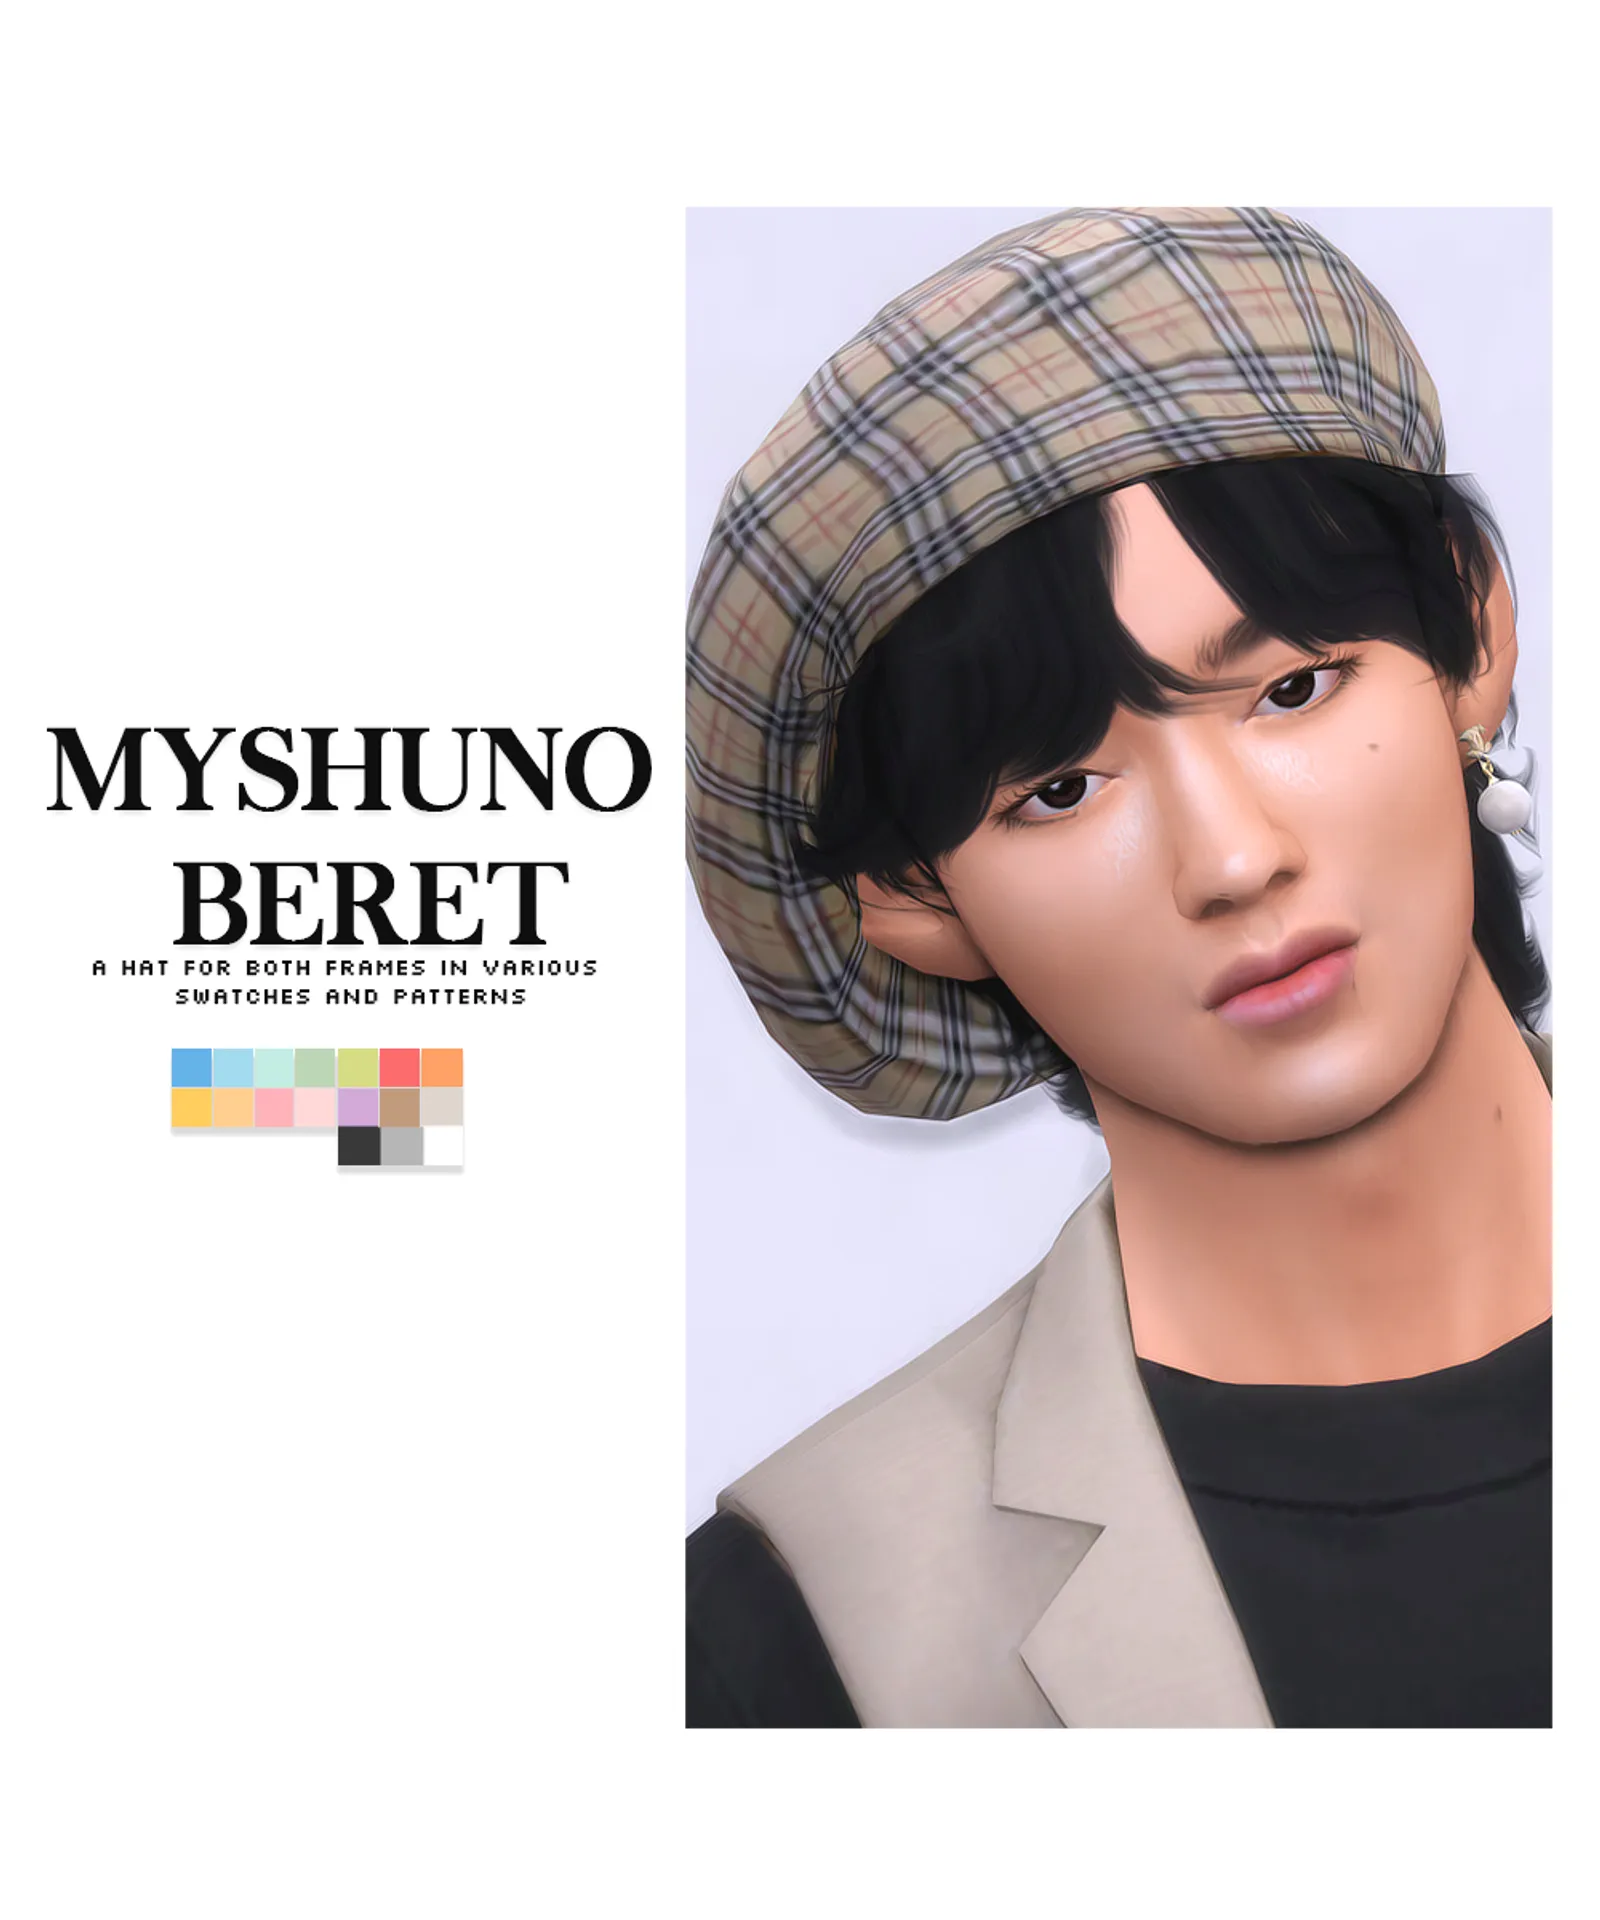 Myshuno Beret  by @nucrests